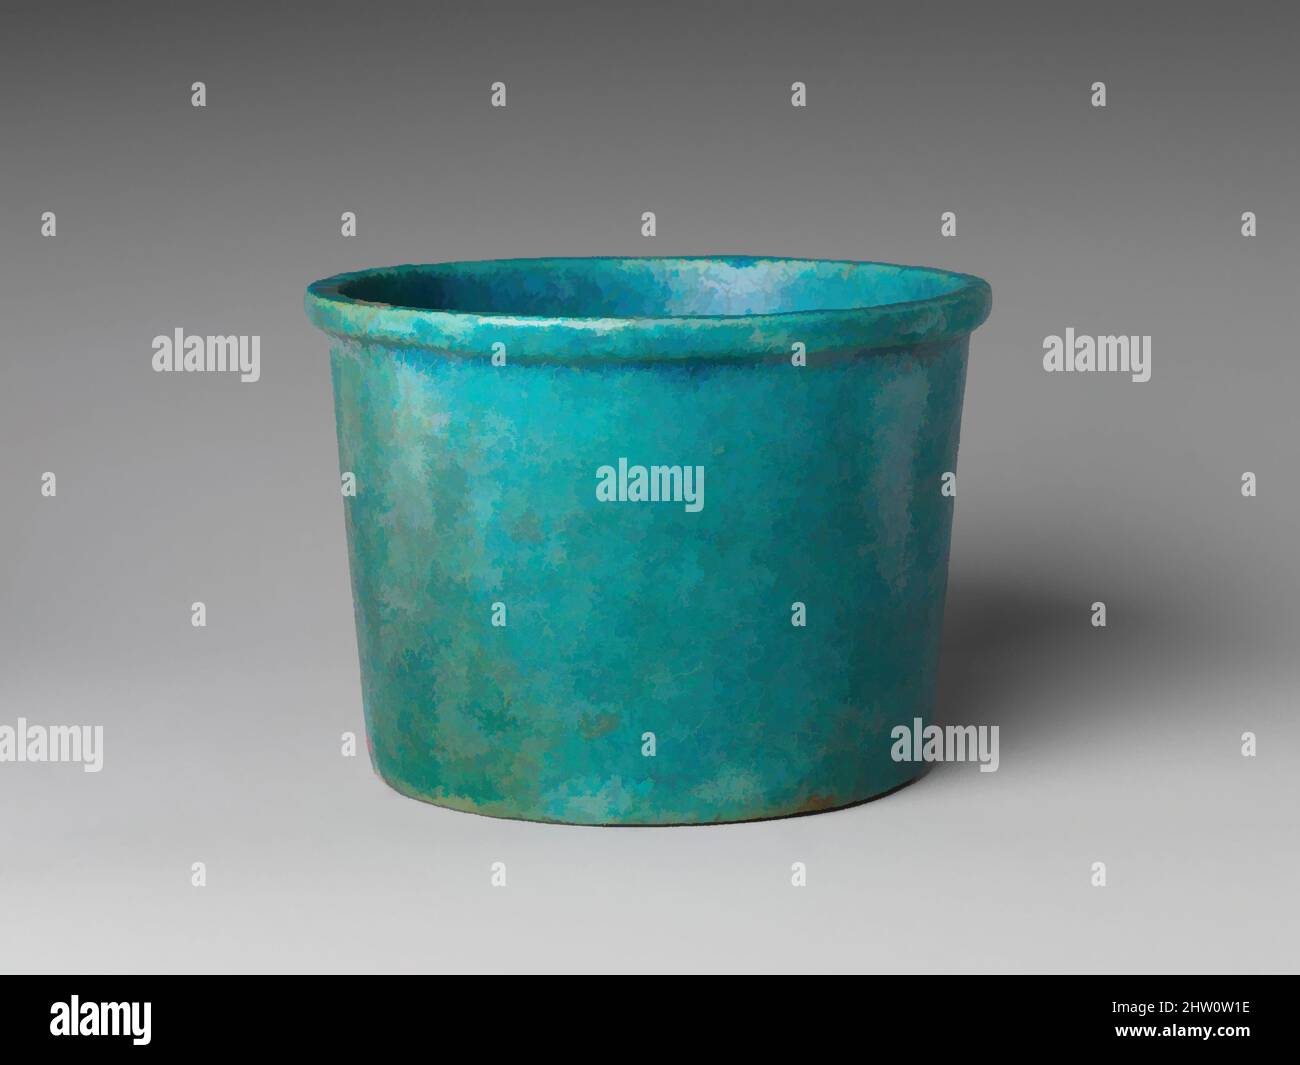 Art inspired by Cup, Late Period–Ptolemaic Period, 500–200 B.C., From Egypt, Faience, H. 9.3 x dia. 13 cm (3 11/16 x 5 1/8 in), Faience cups of this type are frequent in the Late Period. A recent study of faience vessels notes that examples were found in the western dump at the Sacred, Classic works modernized by Artotop with a splash of modernity. Shapes, color and value, eye-catching visual impact on art. Emotions through freedom of artworks in a contemporary way. A timeless message pursuing a wildly creative new direction. Artists turning to the digital medium and creating the Artotop NFT Stock Photo